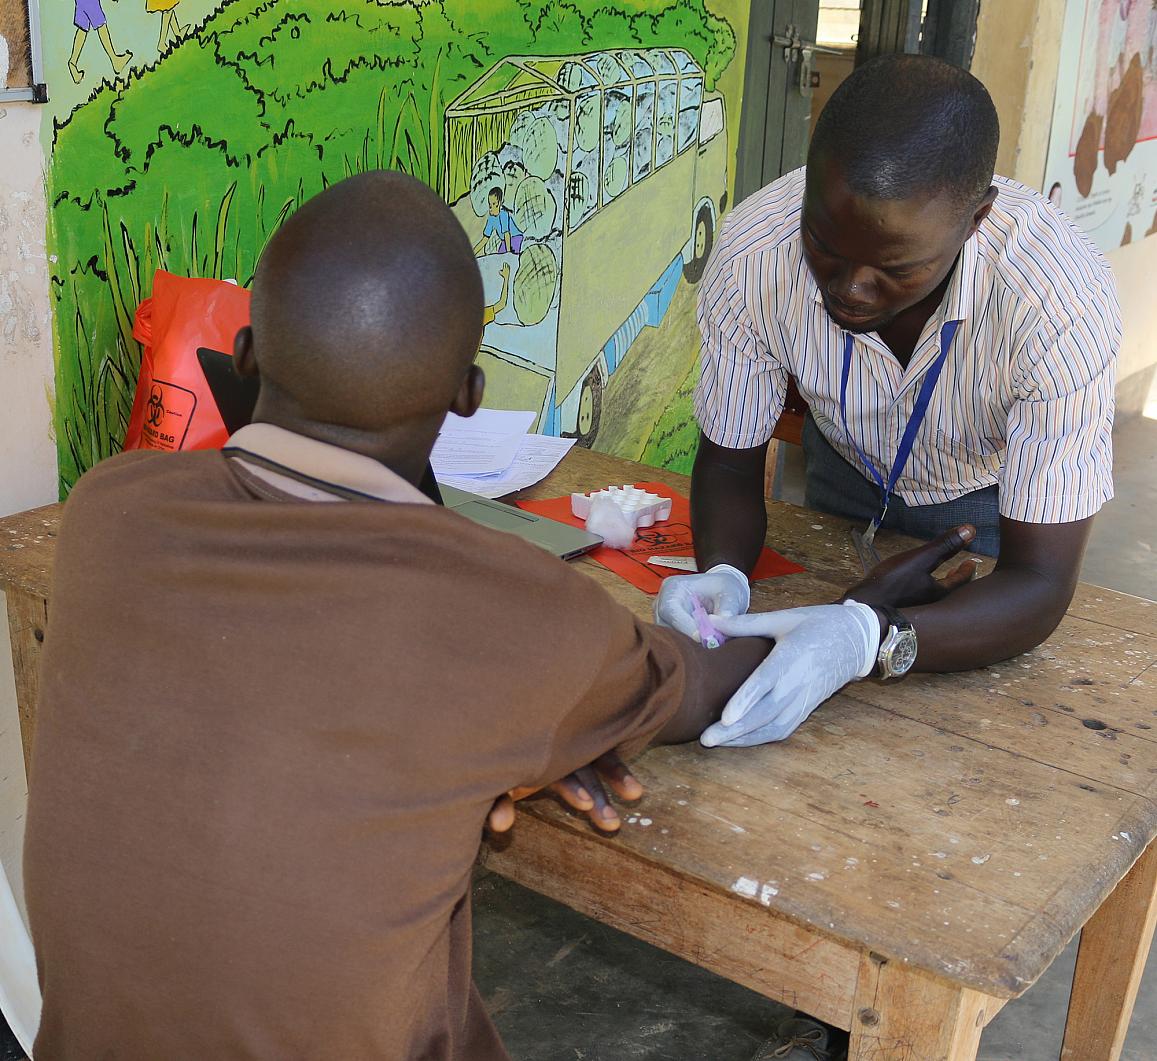 A research assistant draws blood for HIV testing from a participant in the Rakai Community Cohort Study.